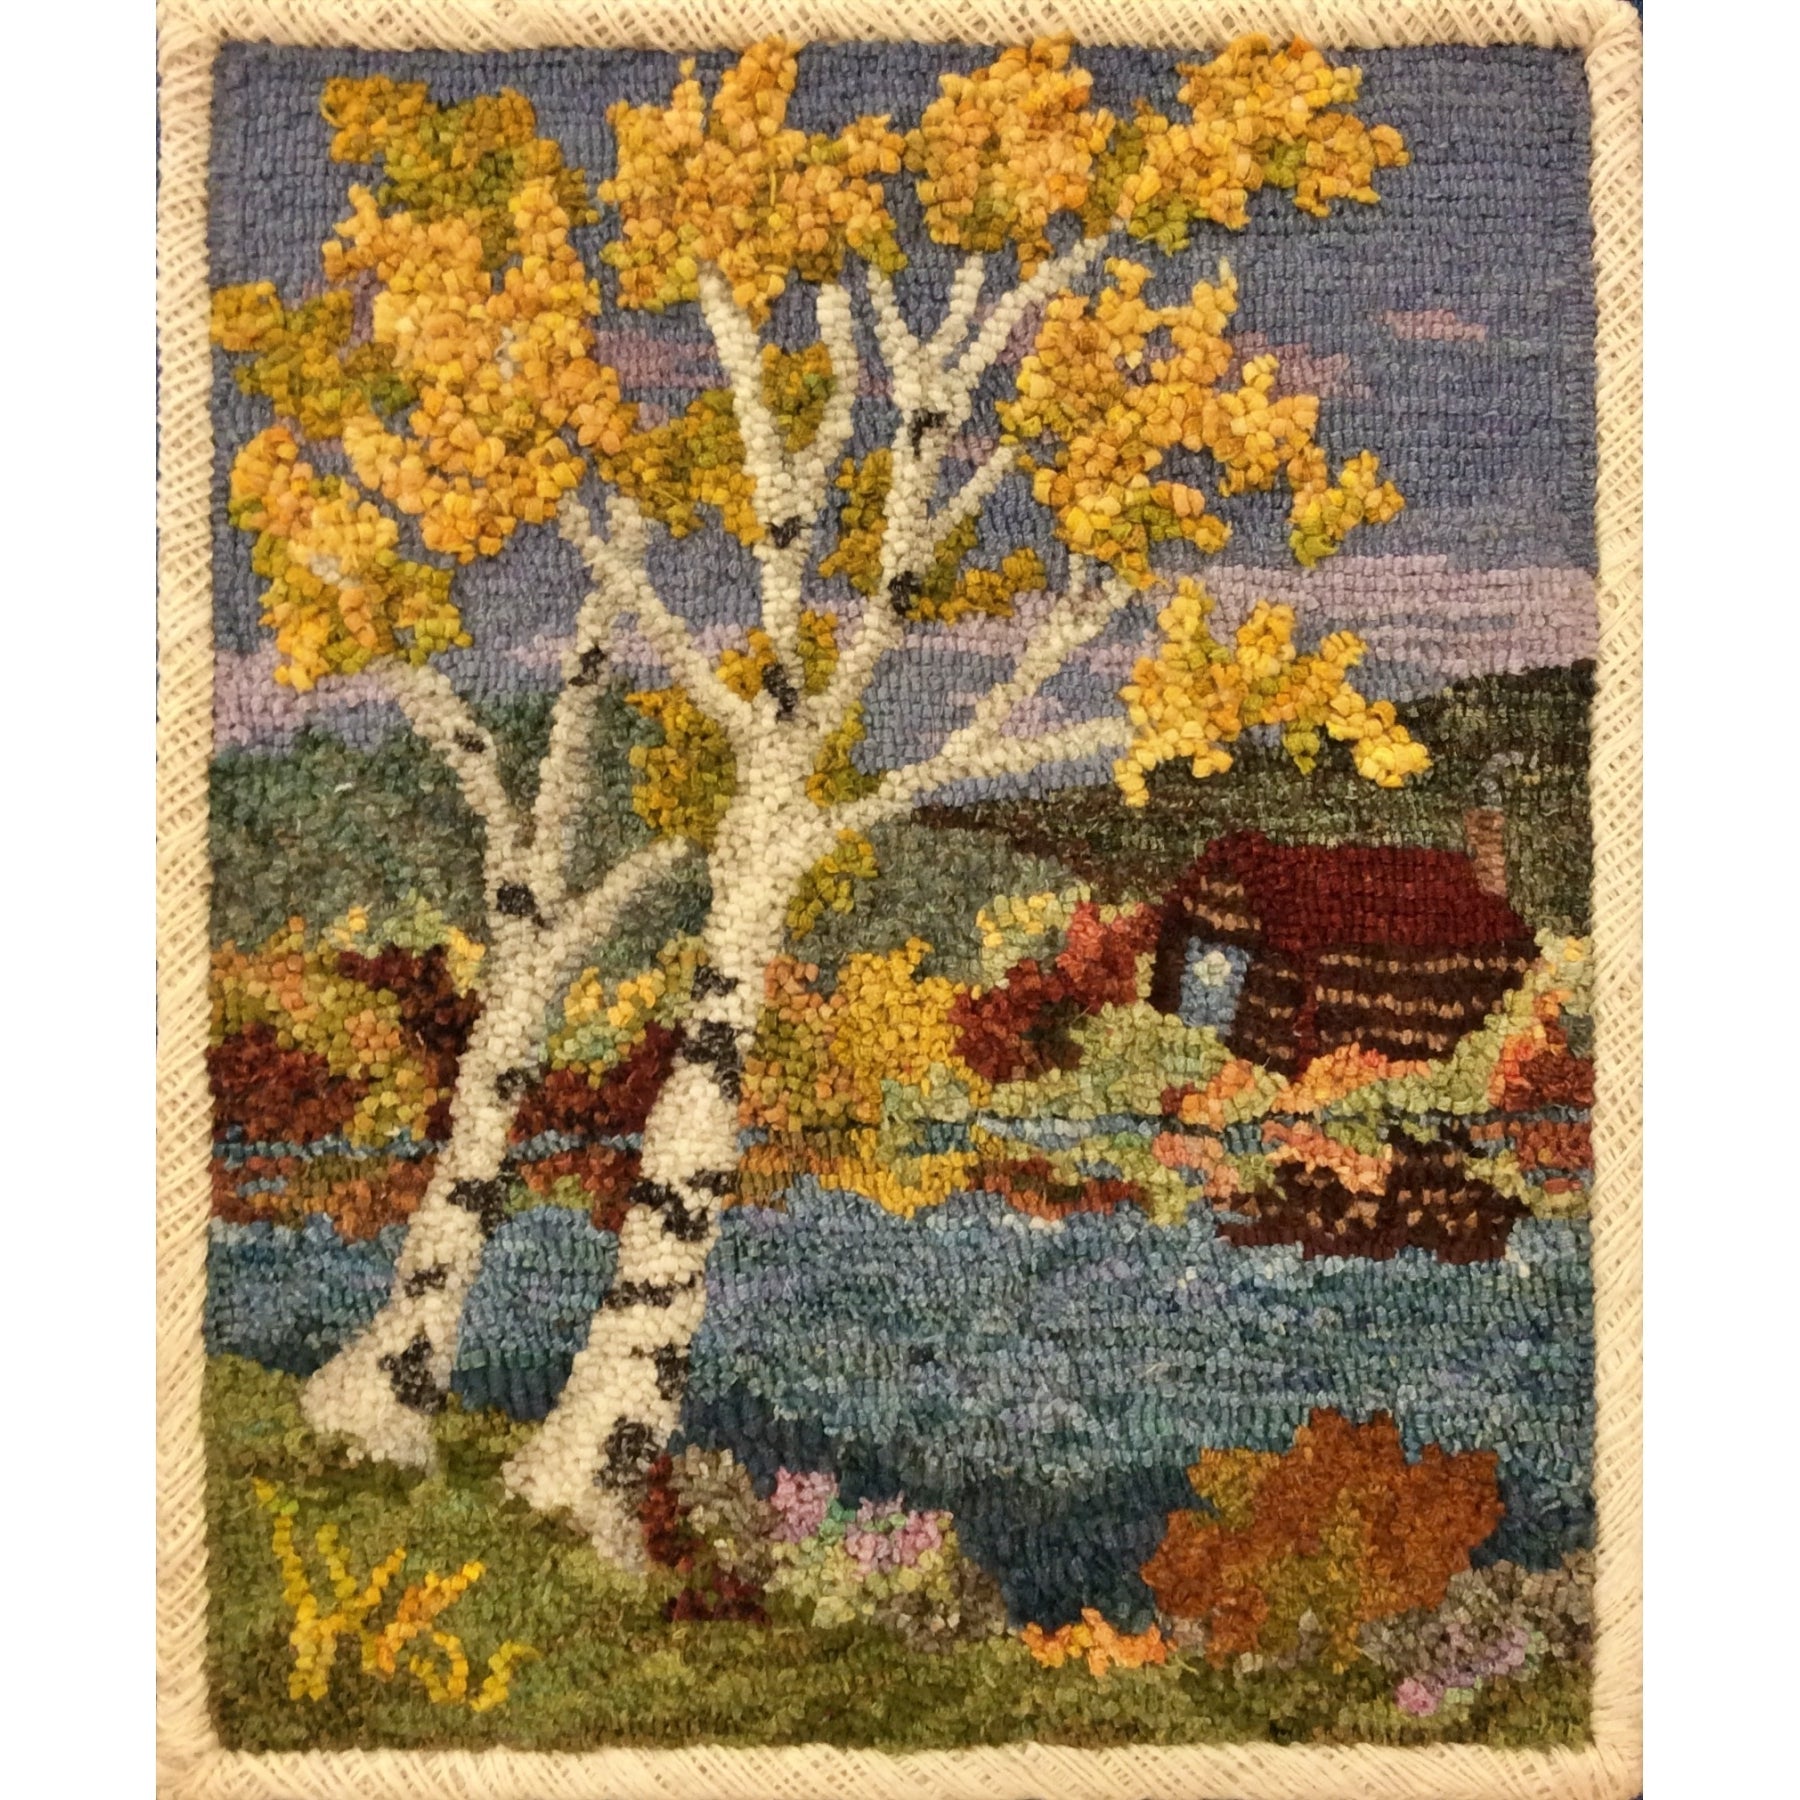 Birches, rug hooked by Lynn Roth